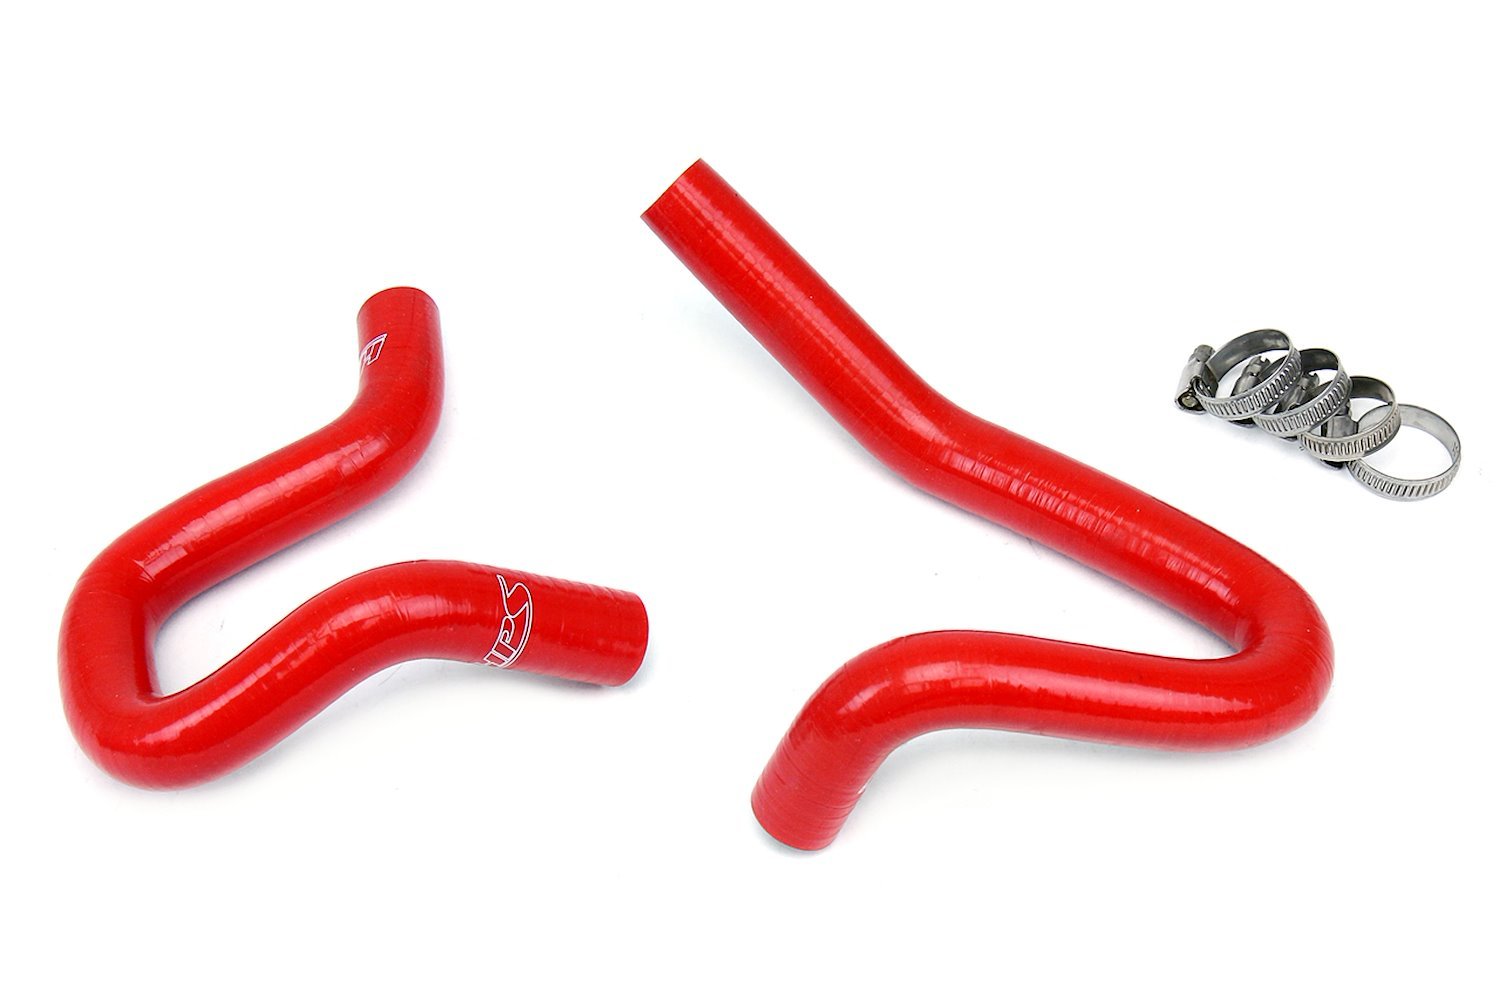 57-1324H-RED Heater Hose Kit, High-Temp 3-Ply Reinforced Silicone, Replace OEM Rubber Heater Coolant Hoses